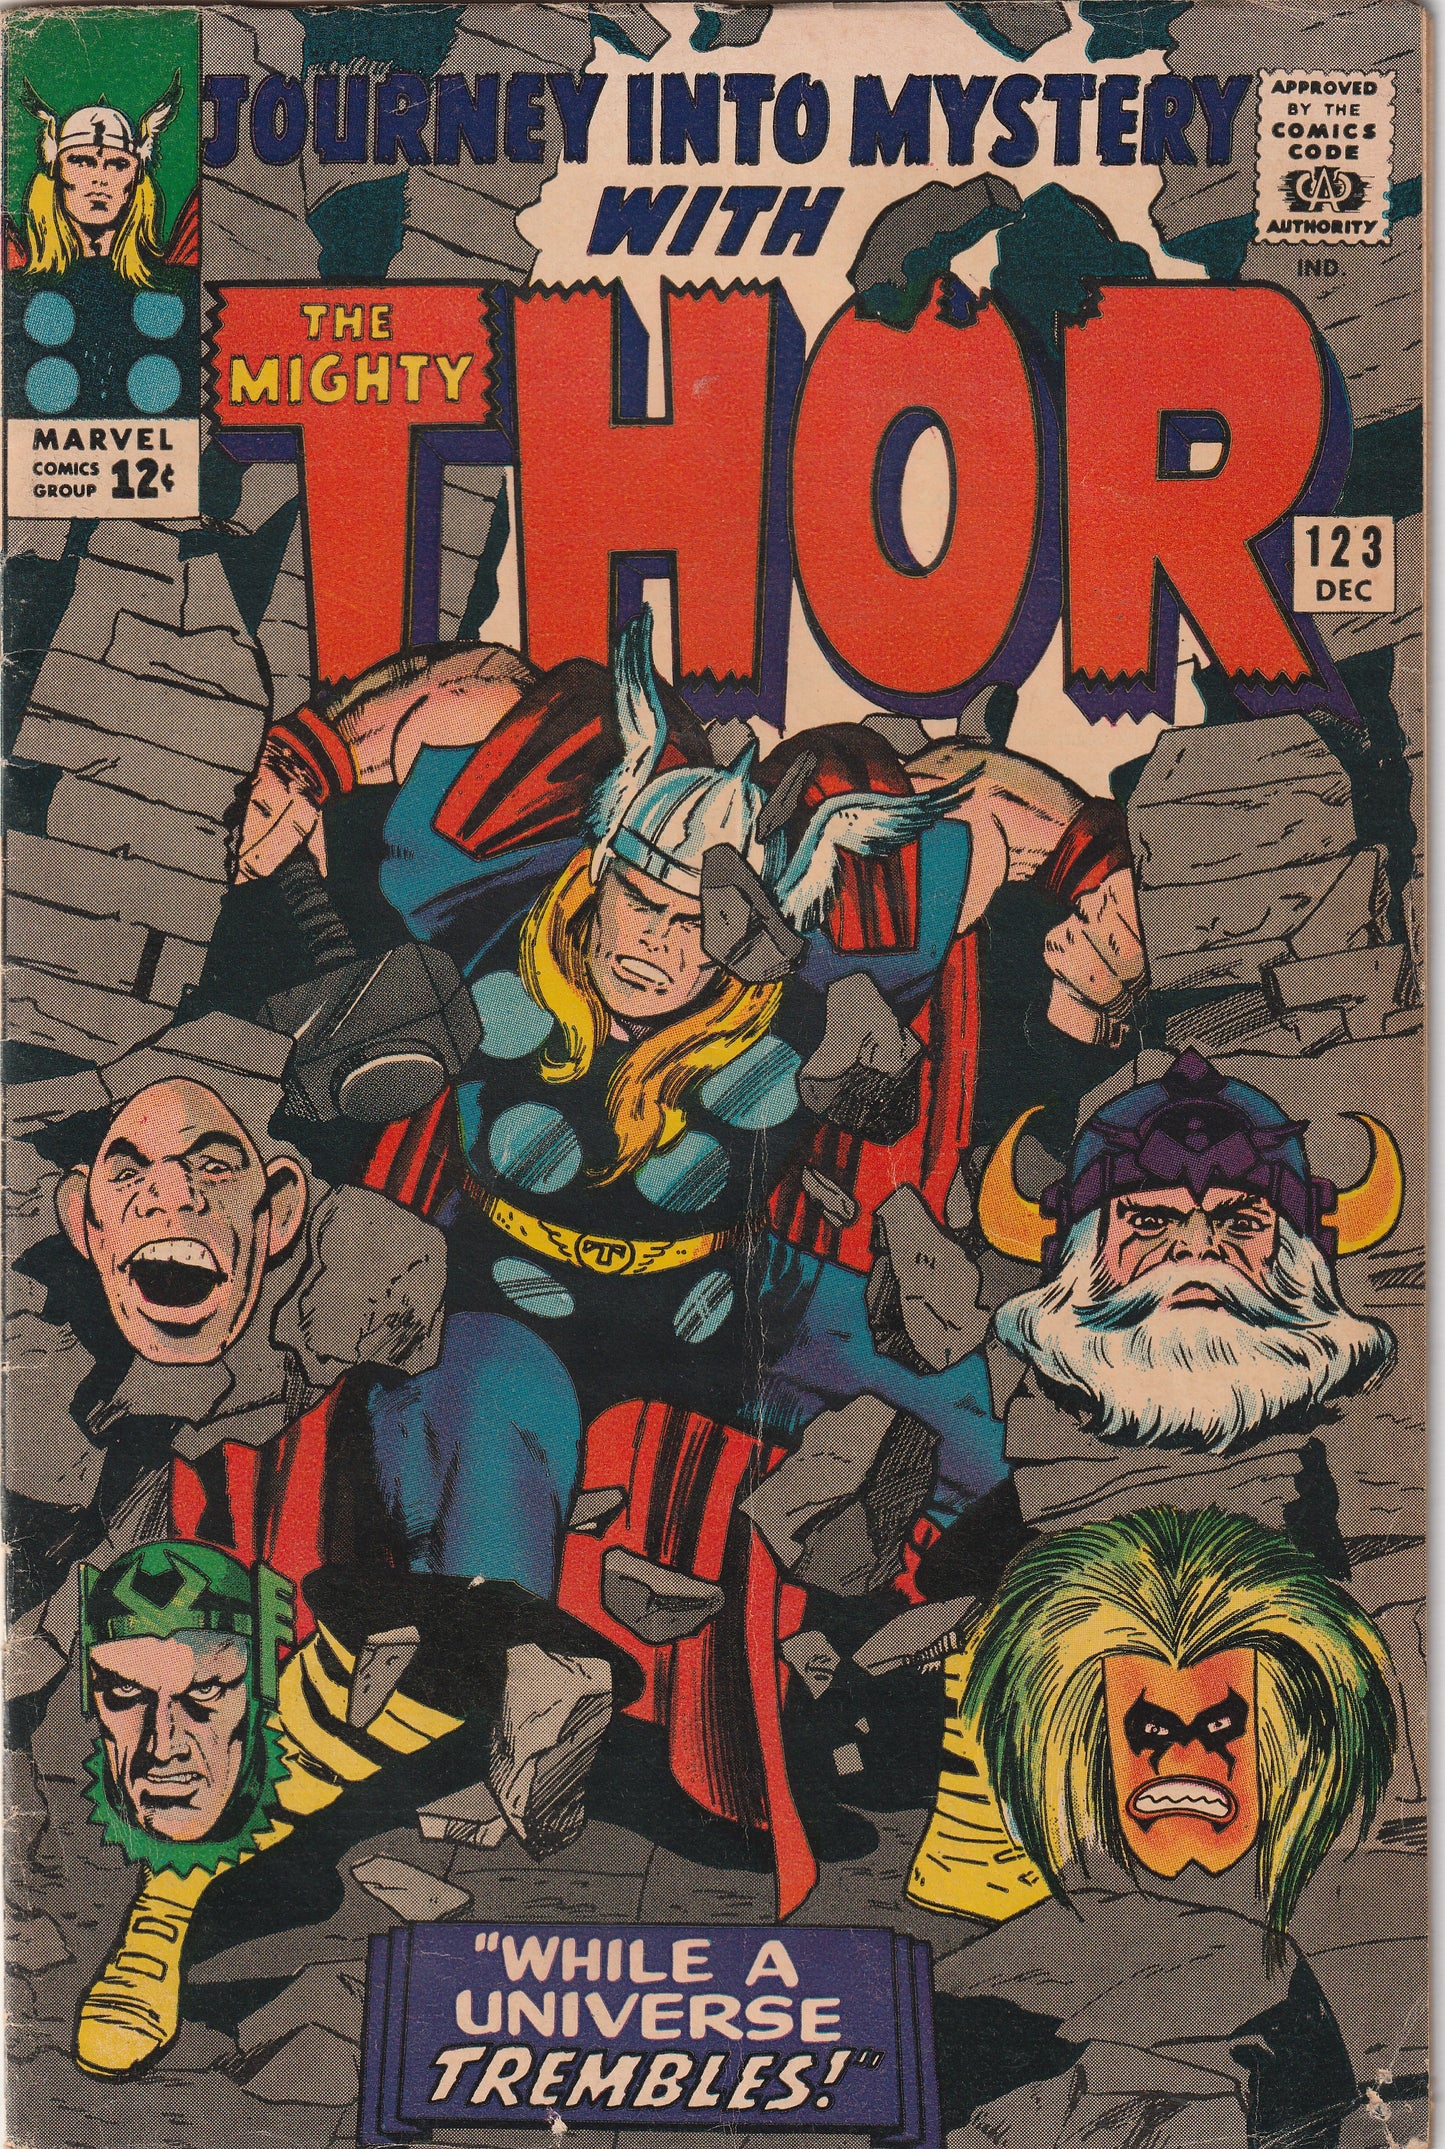 Journey Into Mystery #123 (1965) - With Thor